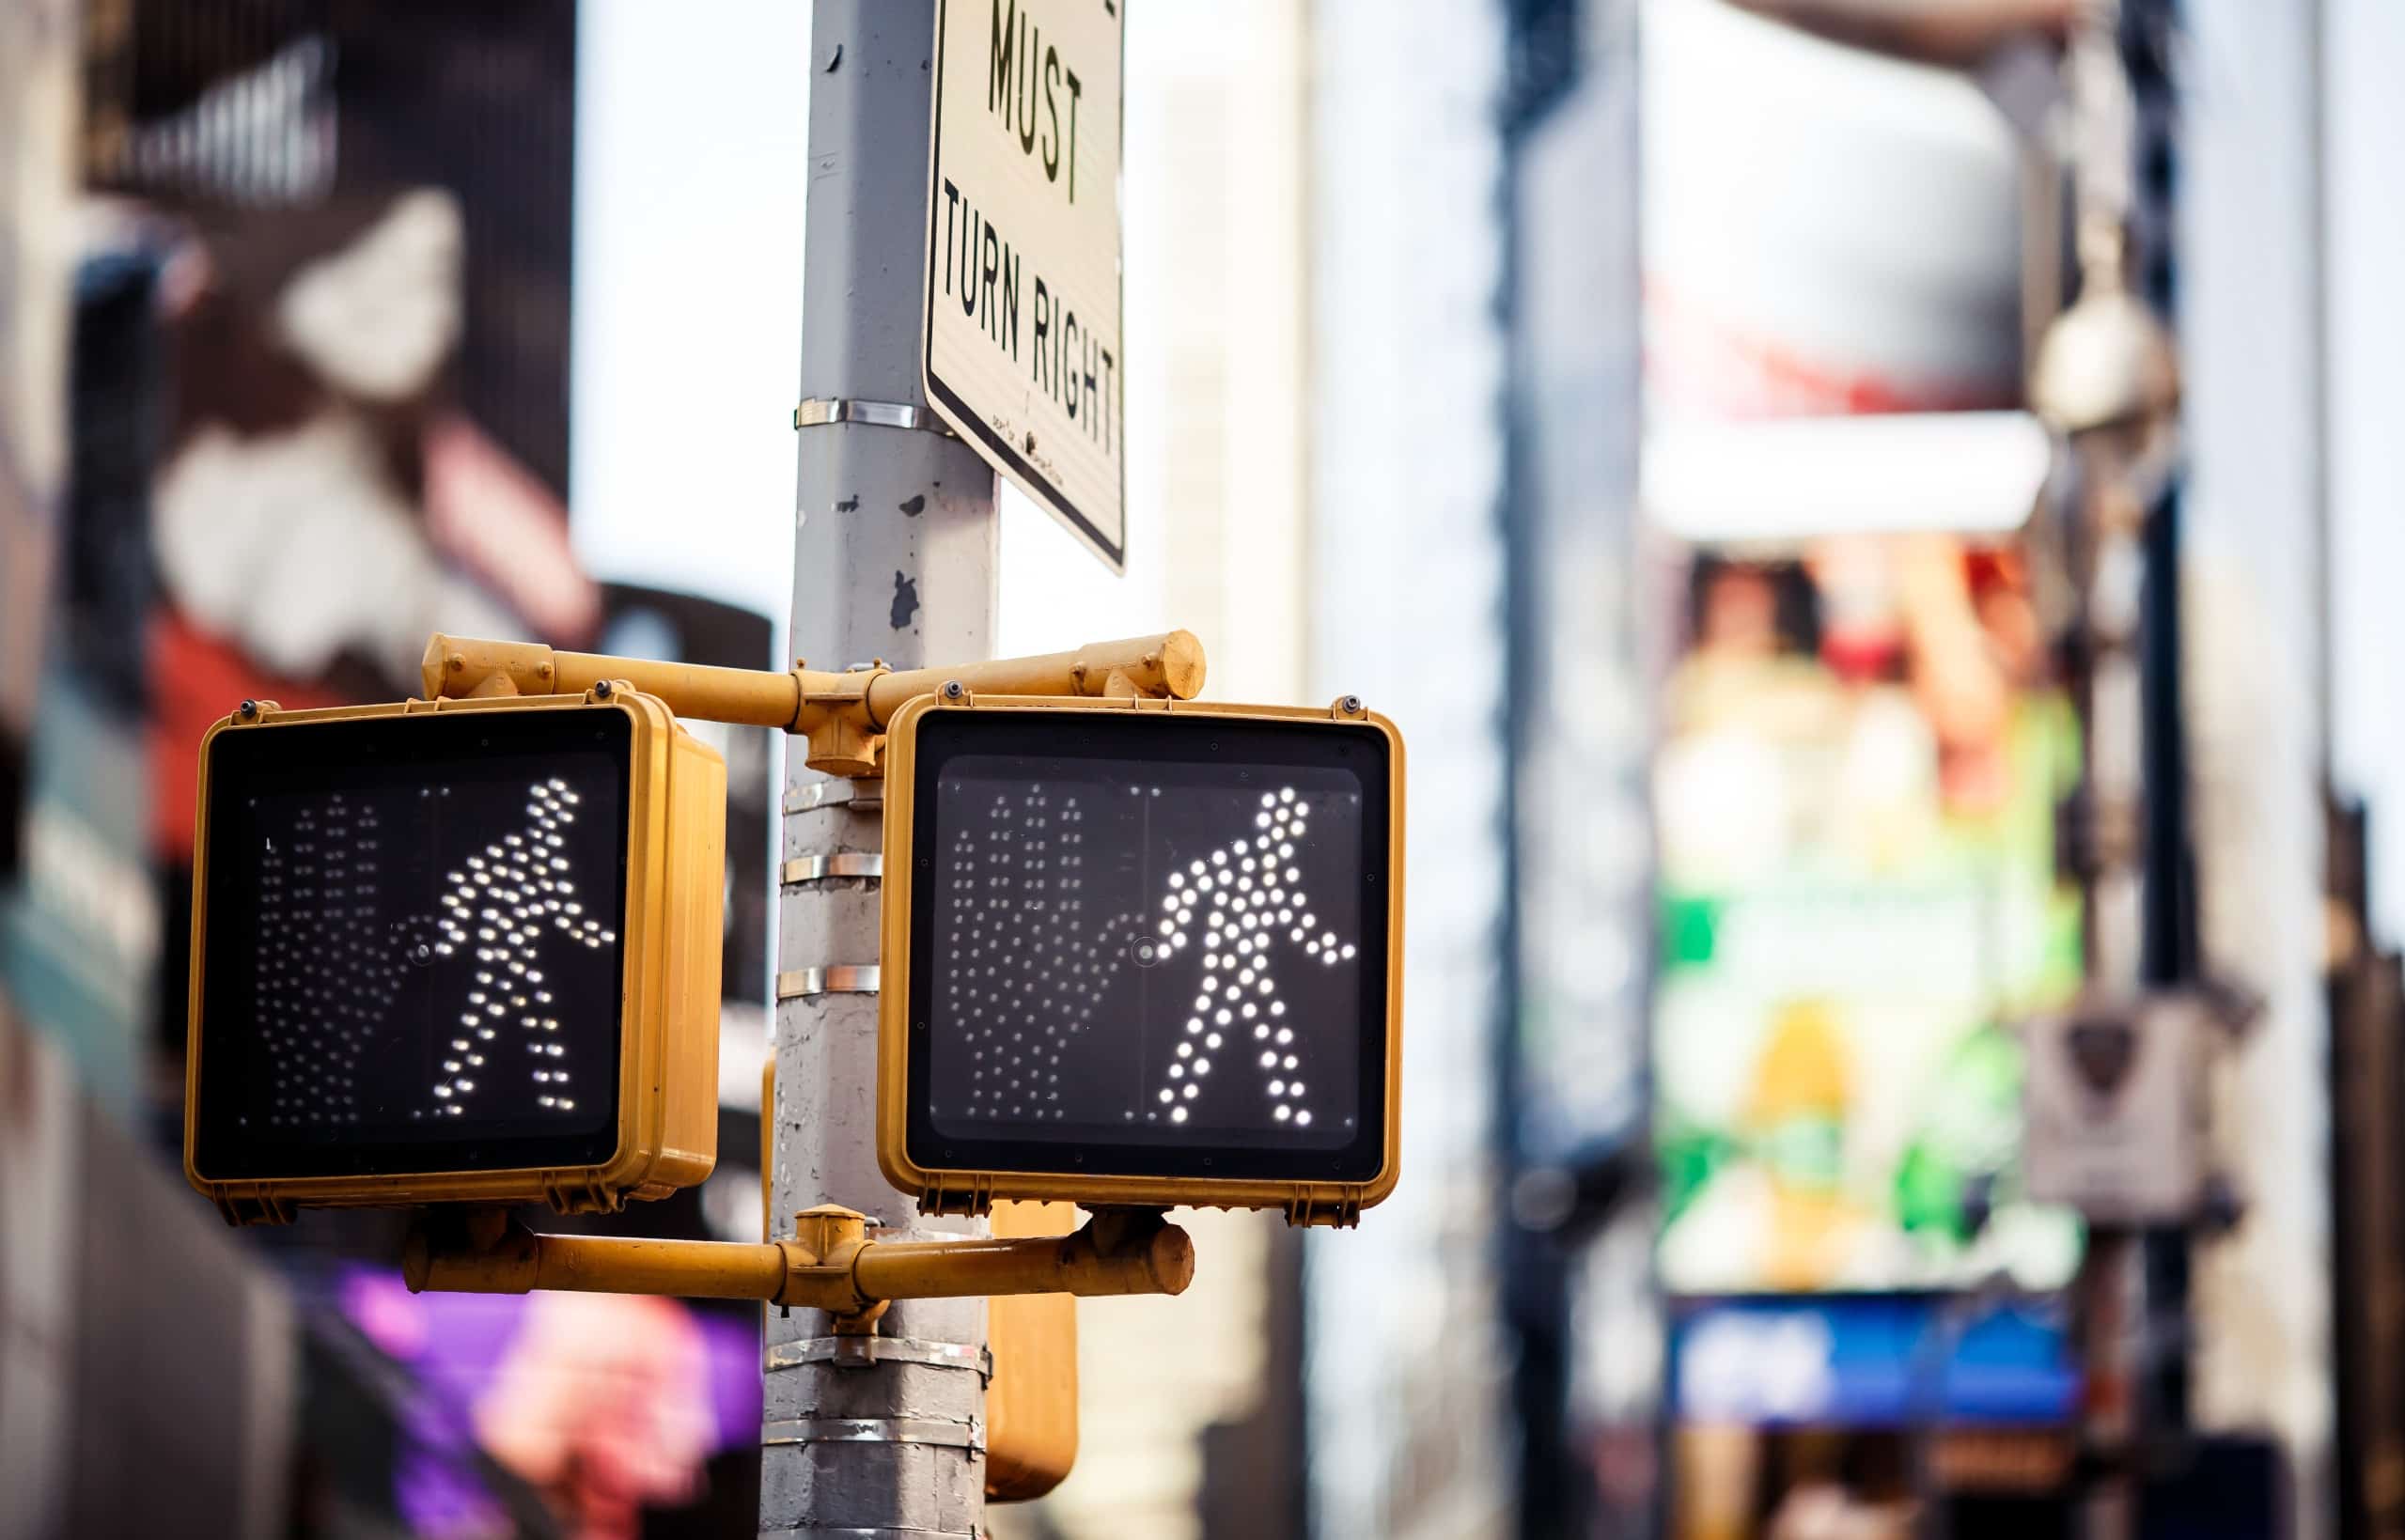 Pedestrian Laws: What Are They in New York?